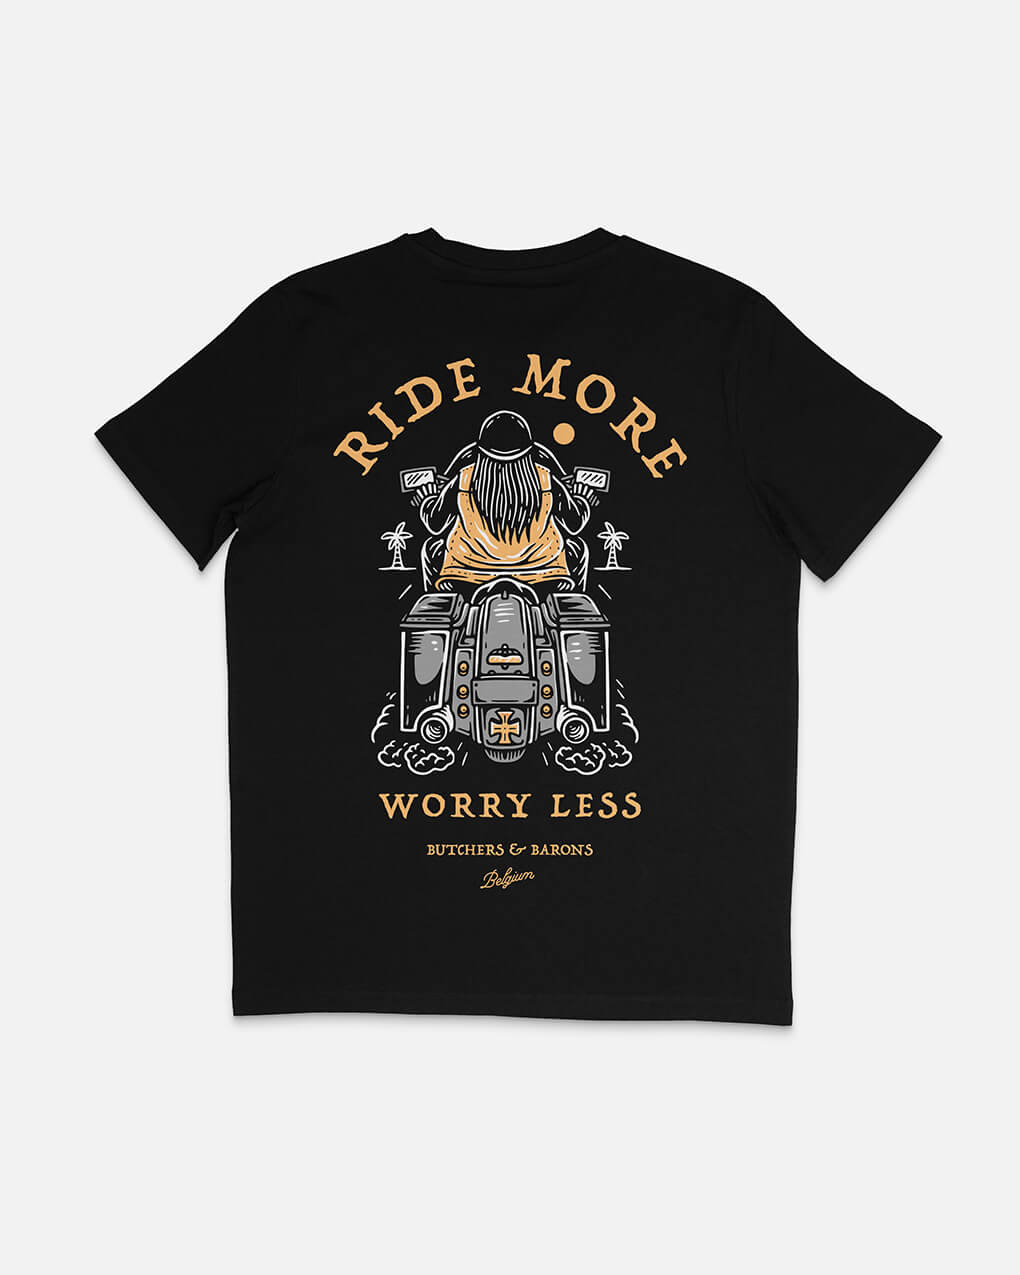 "Ride More, worry less" black motorcycle t-shirt by Butchers & Barons